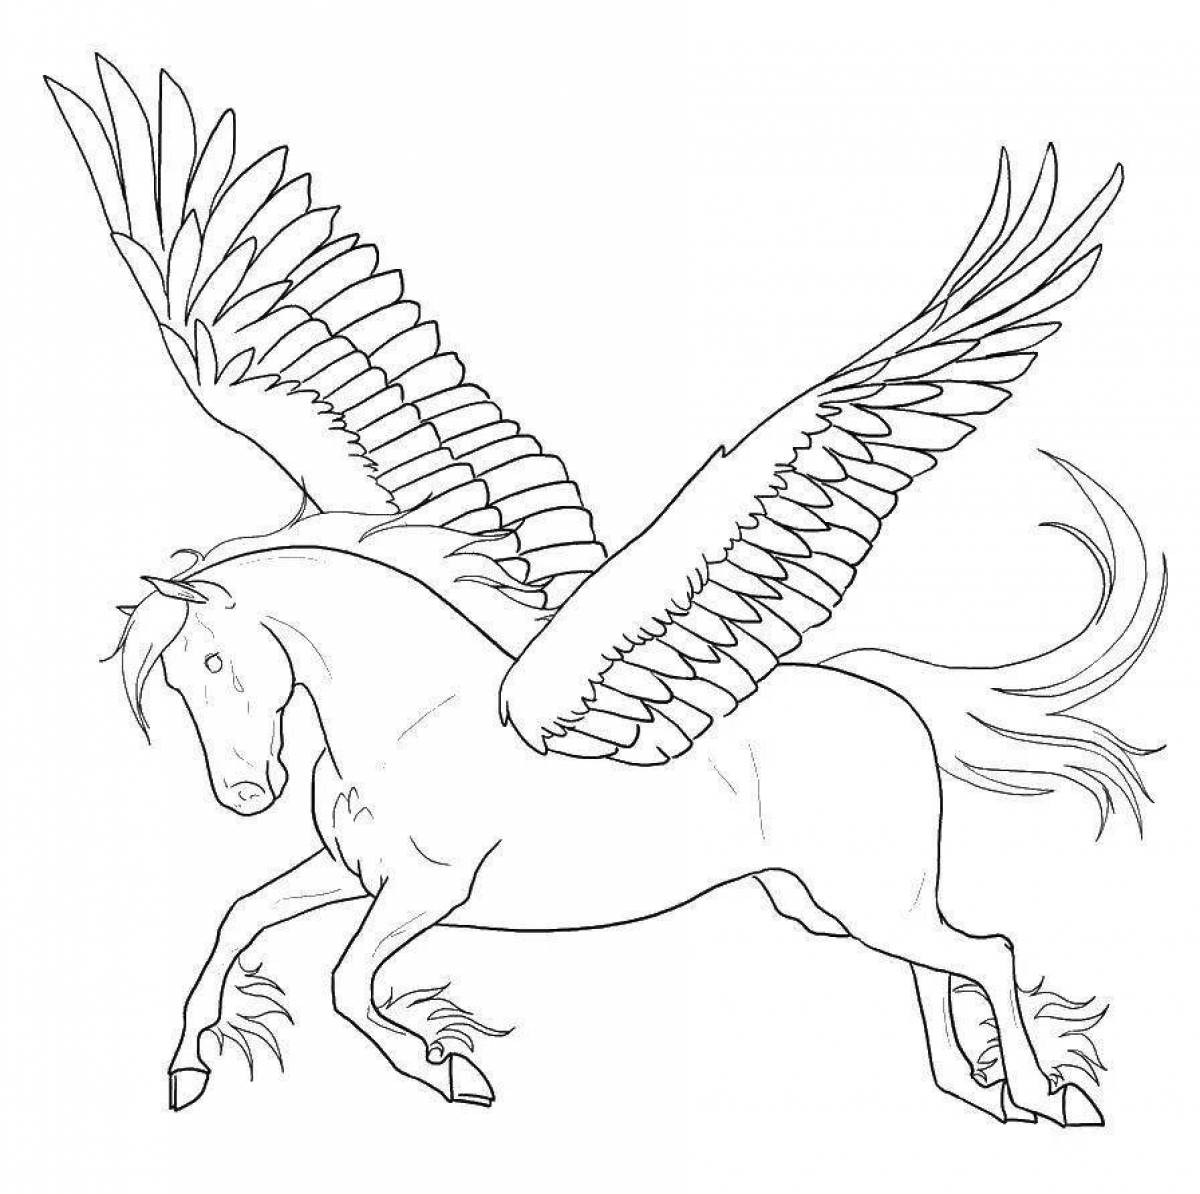 Horse with wings #5